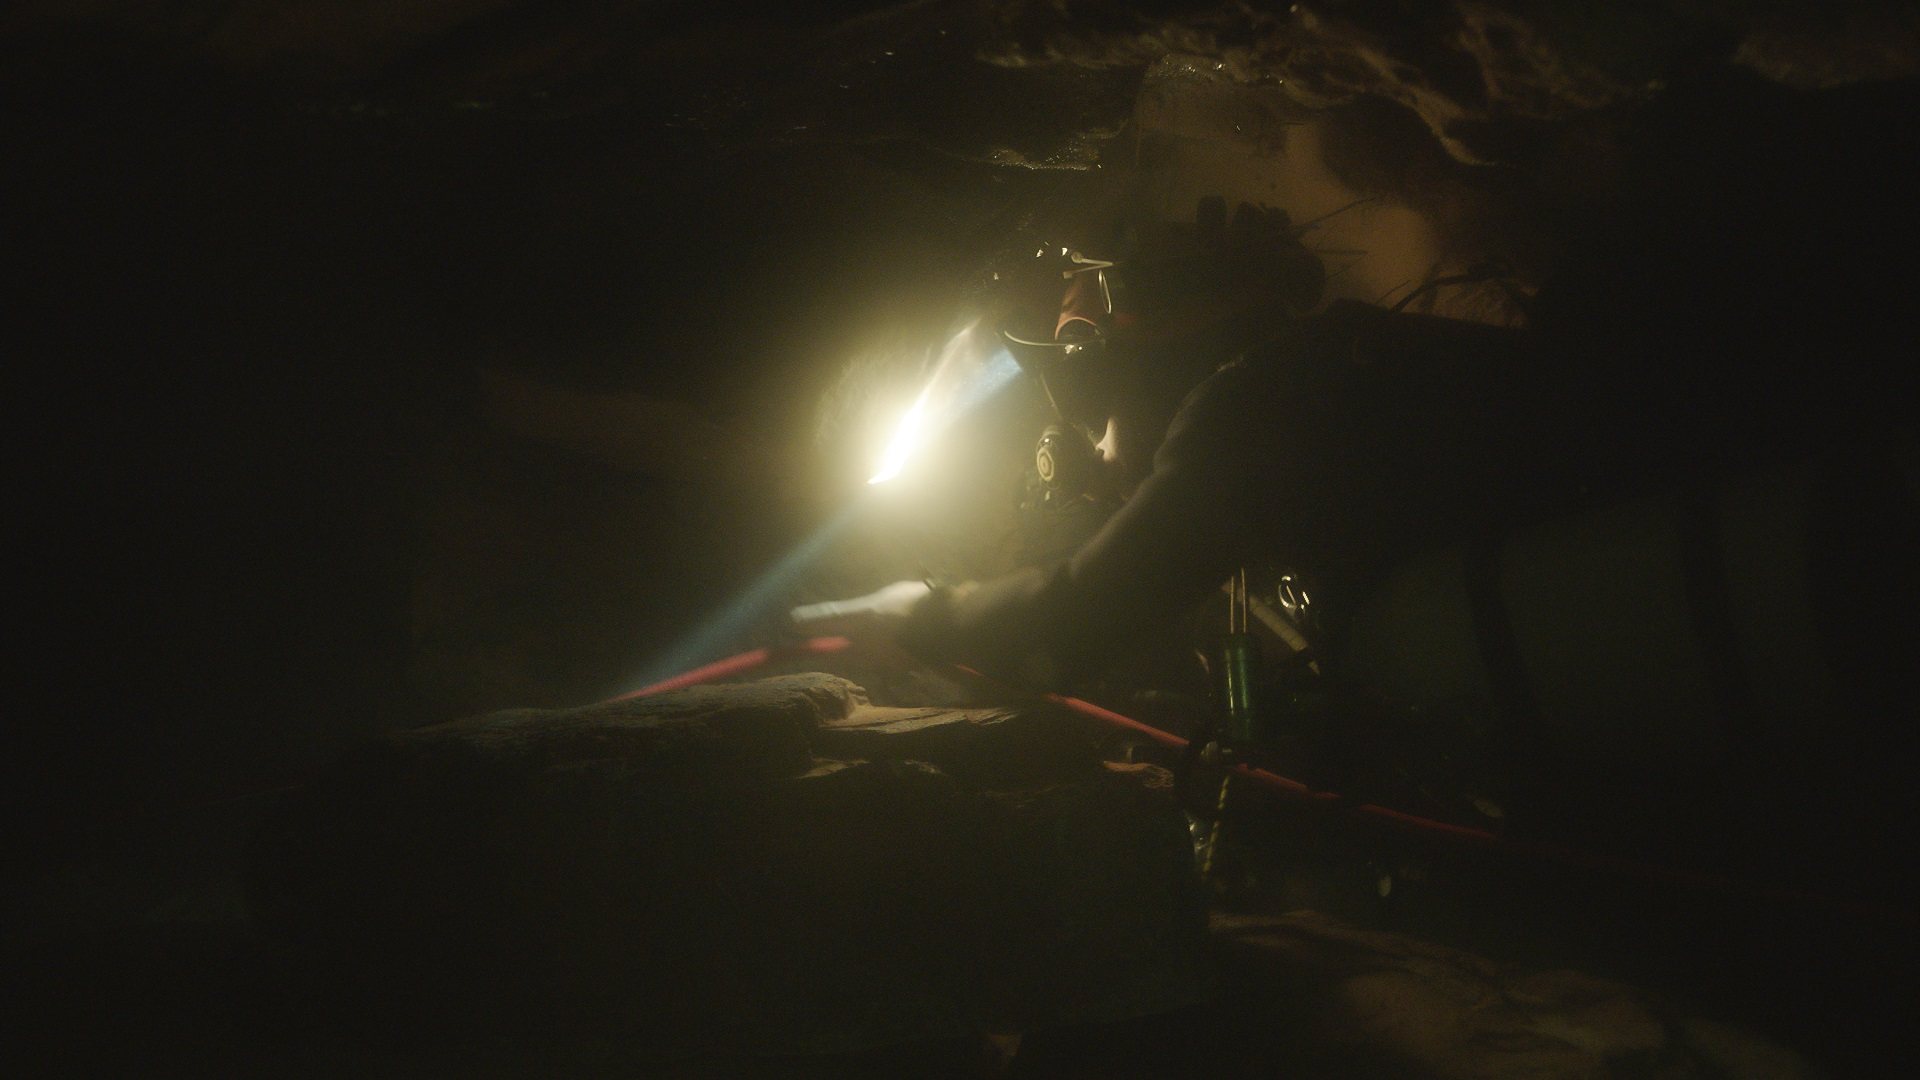 A diver swims through a dark cave guided by a headlamp.  THE RESCUE chronicles the 2018 rescue of 12 Thai boys and their soccer coach, trapped deep inside a flooded cave. E. Chai Vasarhelyi and Jimmy Chin reveal the perilous world of cave diving, bravery of the rescuers, and dedication of a community that made great sacrifices to save these young boys. Photo: National Geographic.